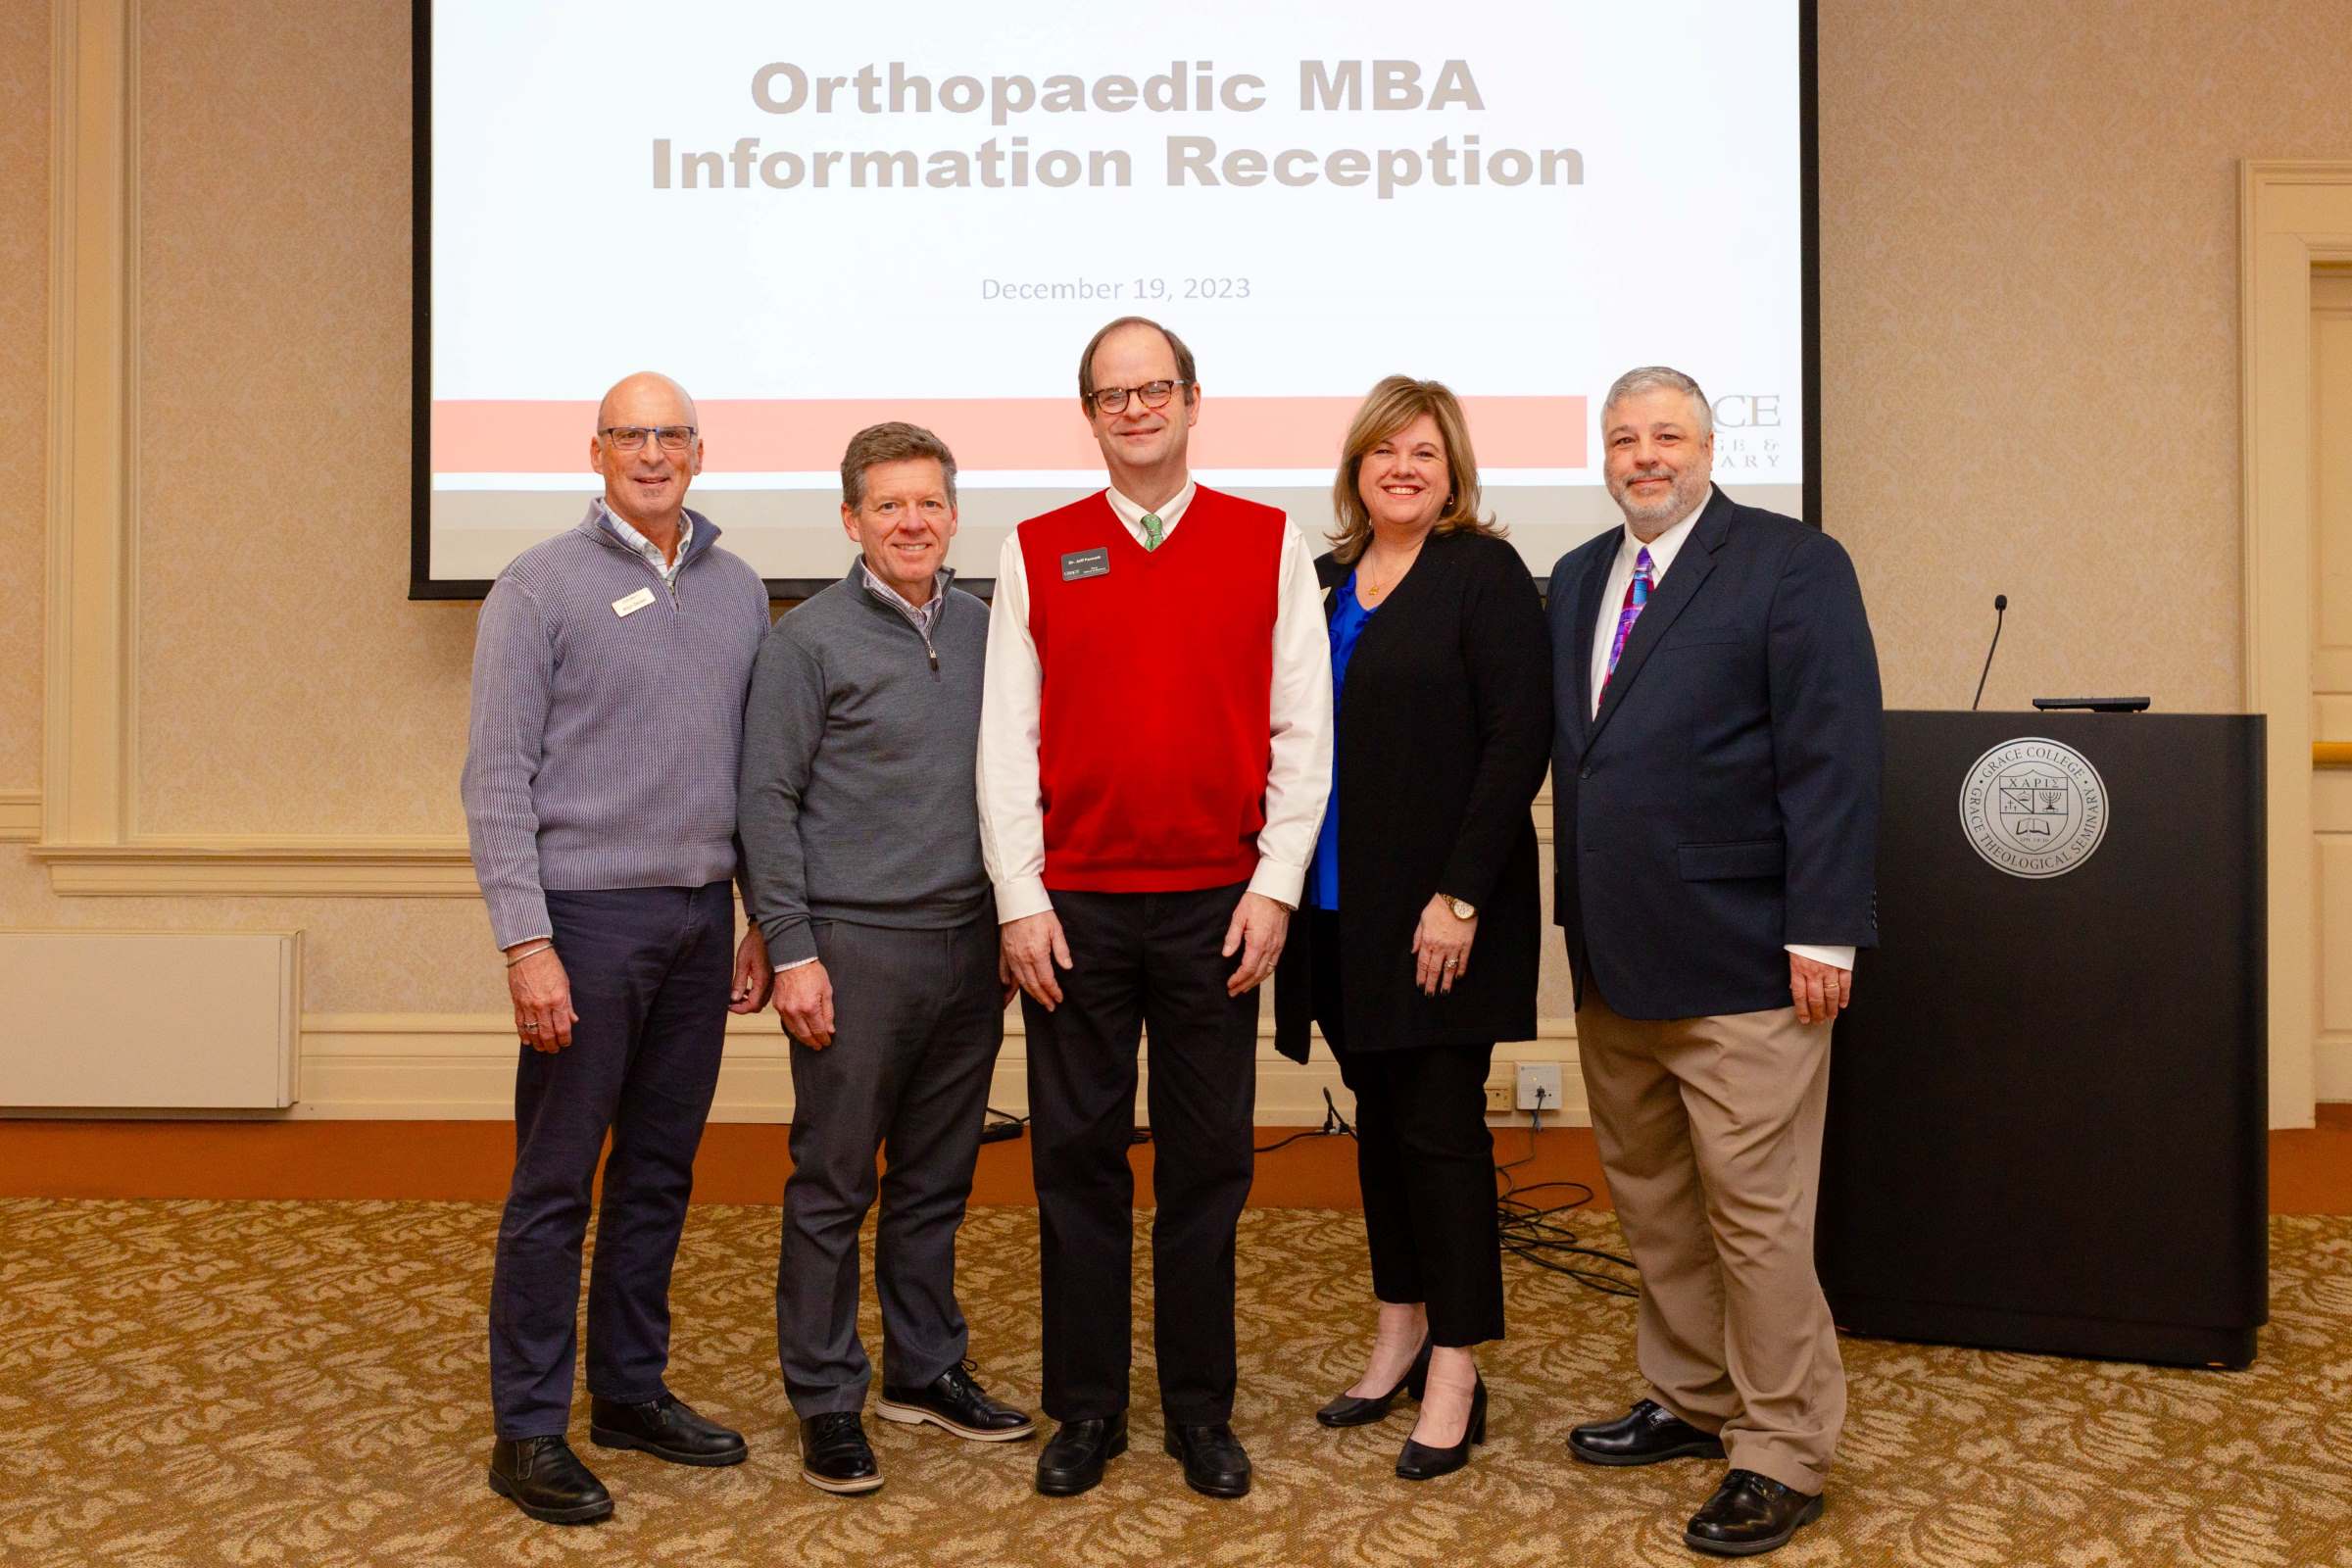 Grace College Online Launches Orthopaedic MBA Degree to Develop Local Talent Pipeline. Request Info or Apply Today!